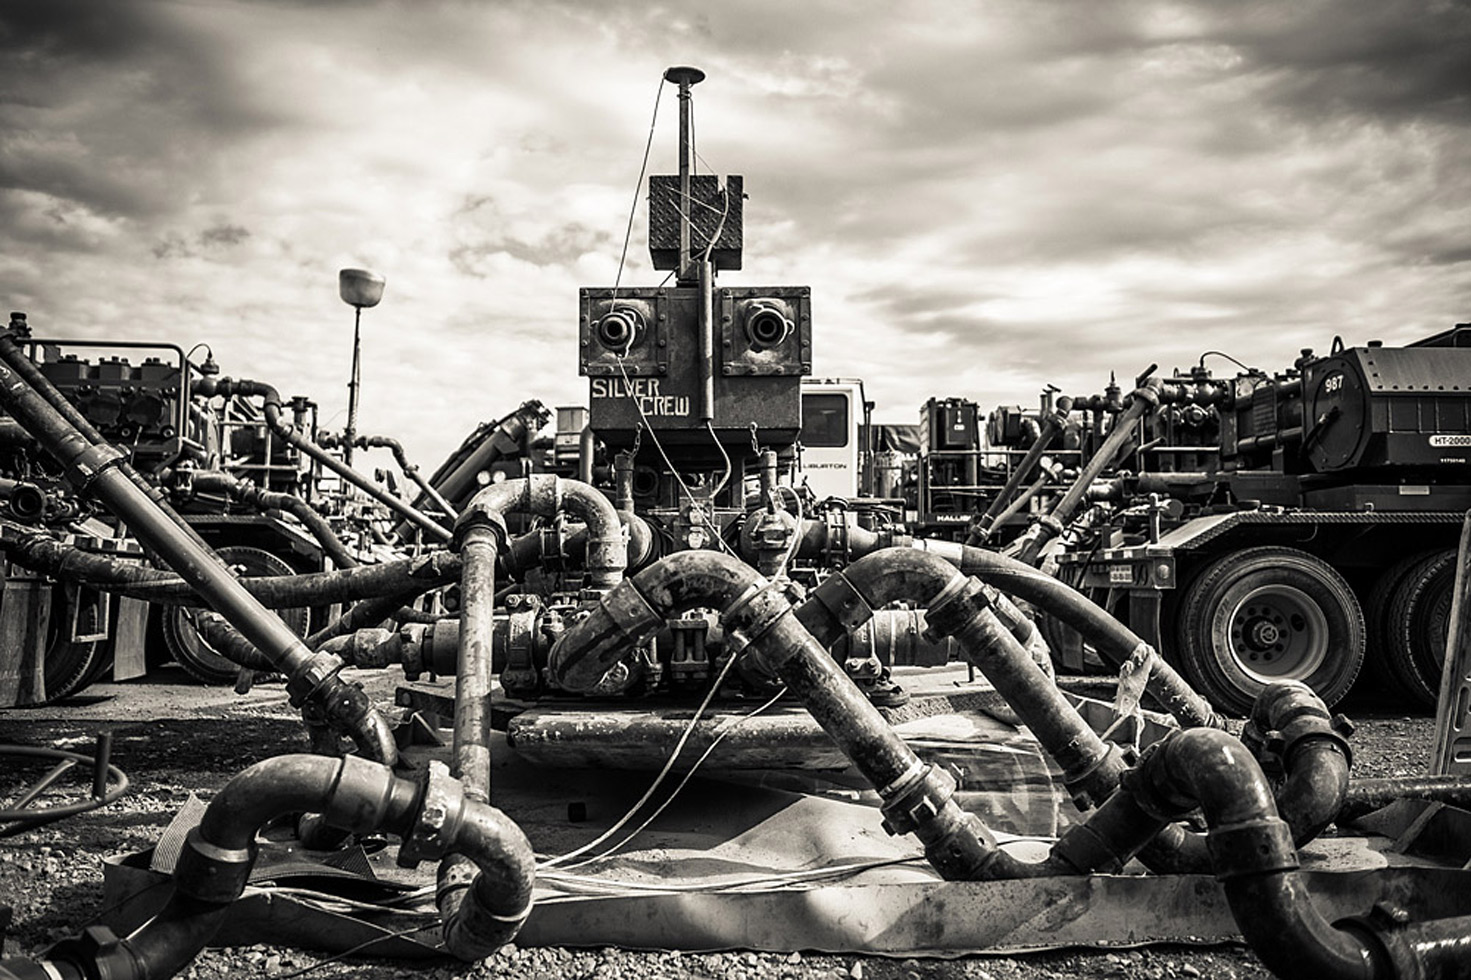 This is what fracking looks like from the surface. The pipes leading into the well head are connected to the trucks in the background. These trucks force water mixed with proppant - sand and tiny ceramic balls that keep the cracks propped open (hence the name) so that oil can flow towards the well pipe - and chemicals down into the well at 10,000 PSI.

Text and images by John Mireles